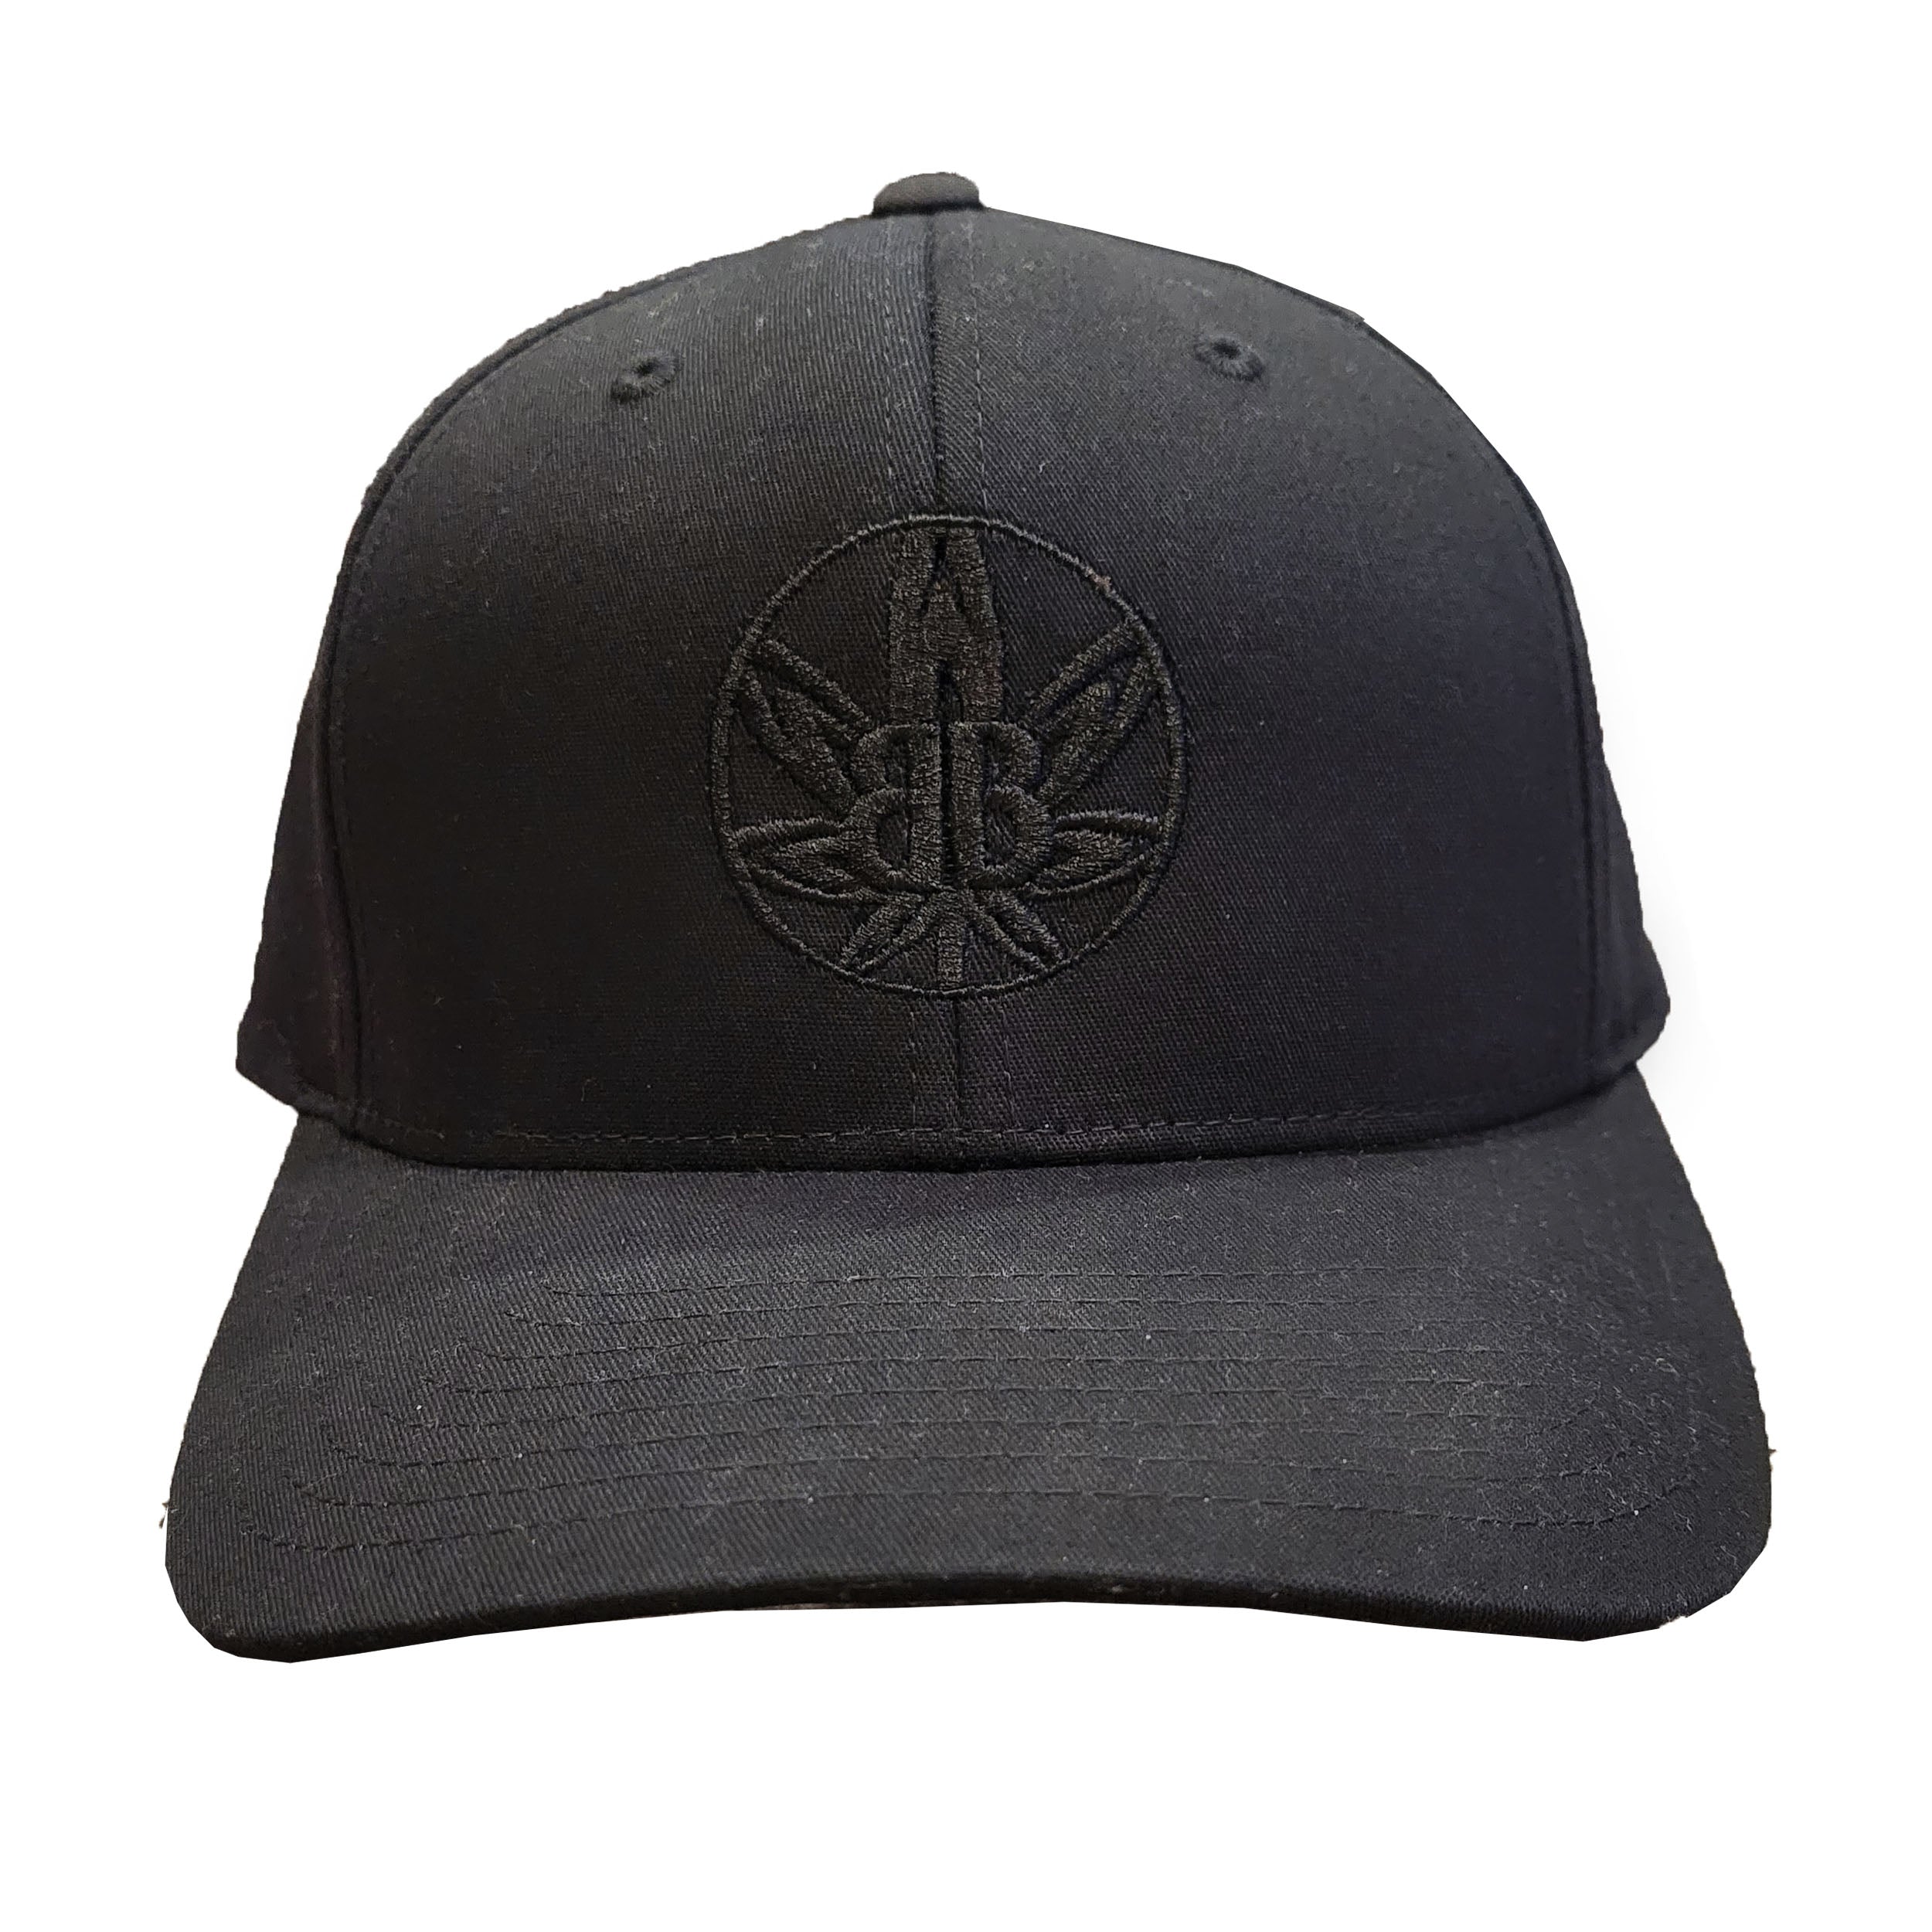 The BB Fitted Cap | Burning Bush Brand